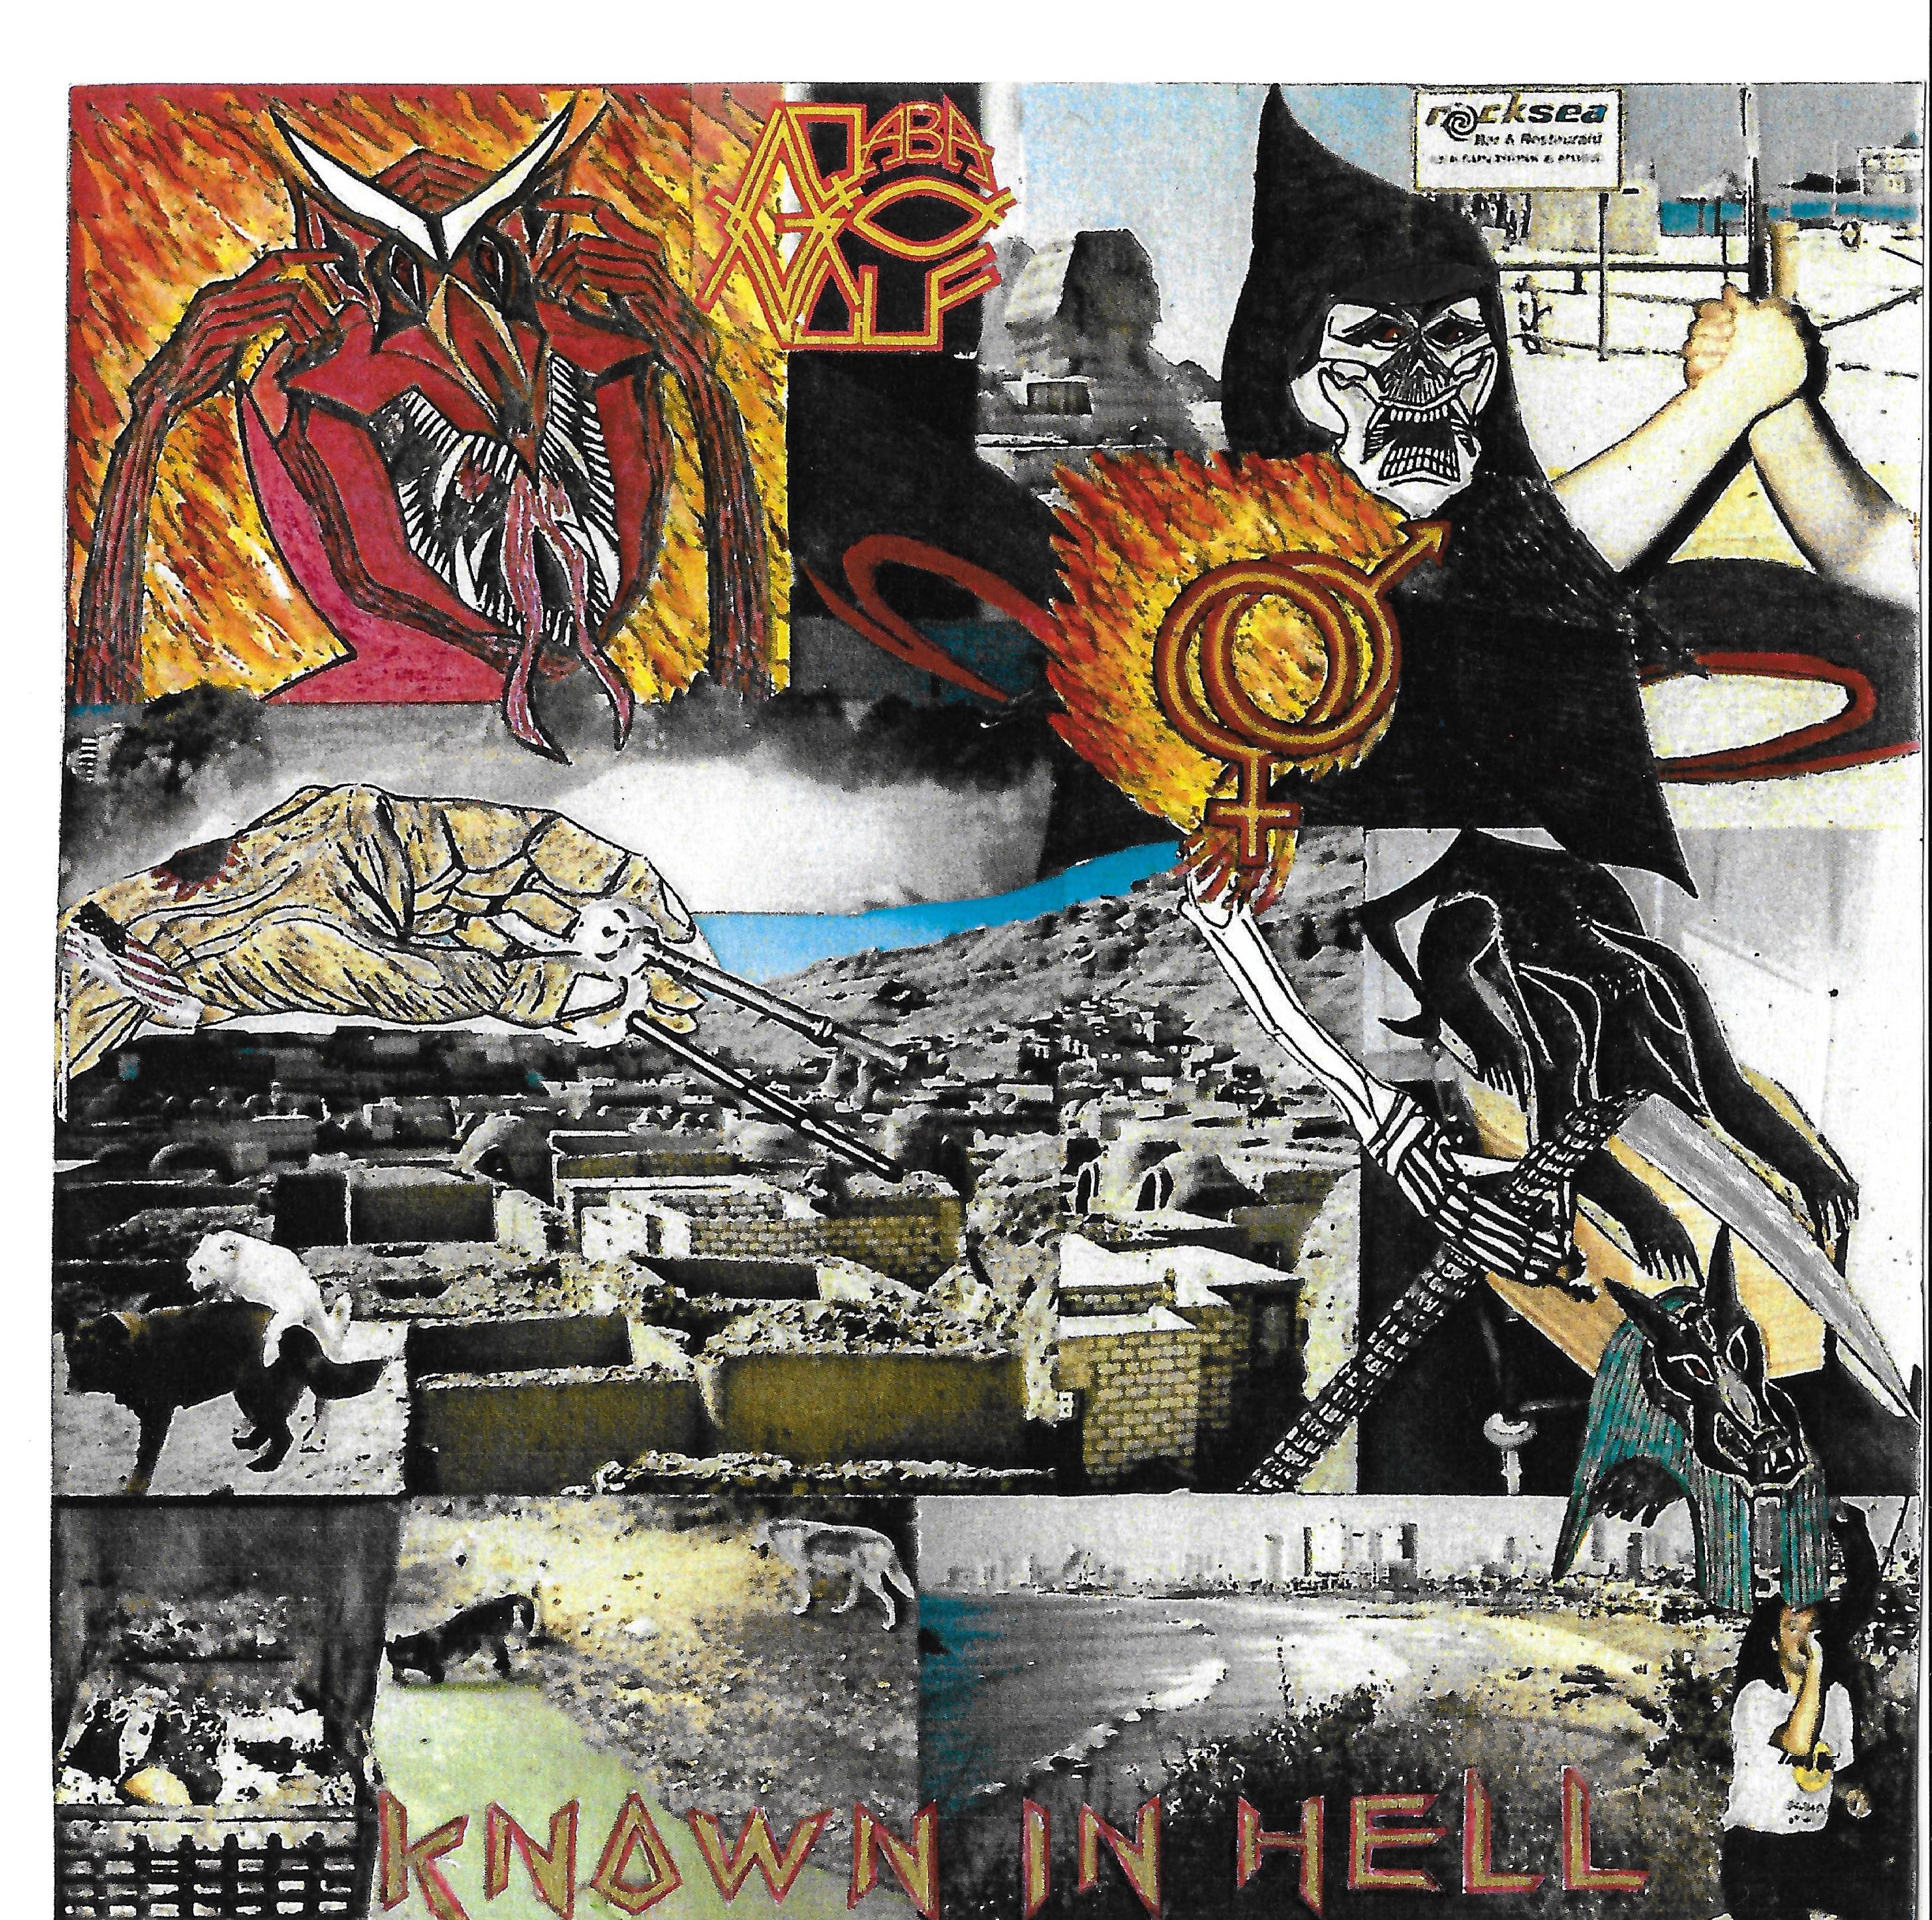 KNOWN IN HELL front cover artwork